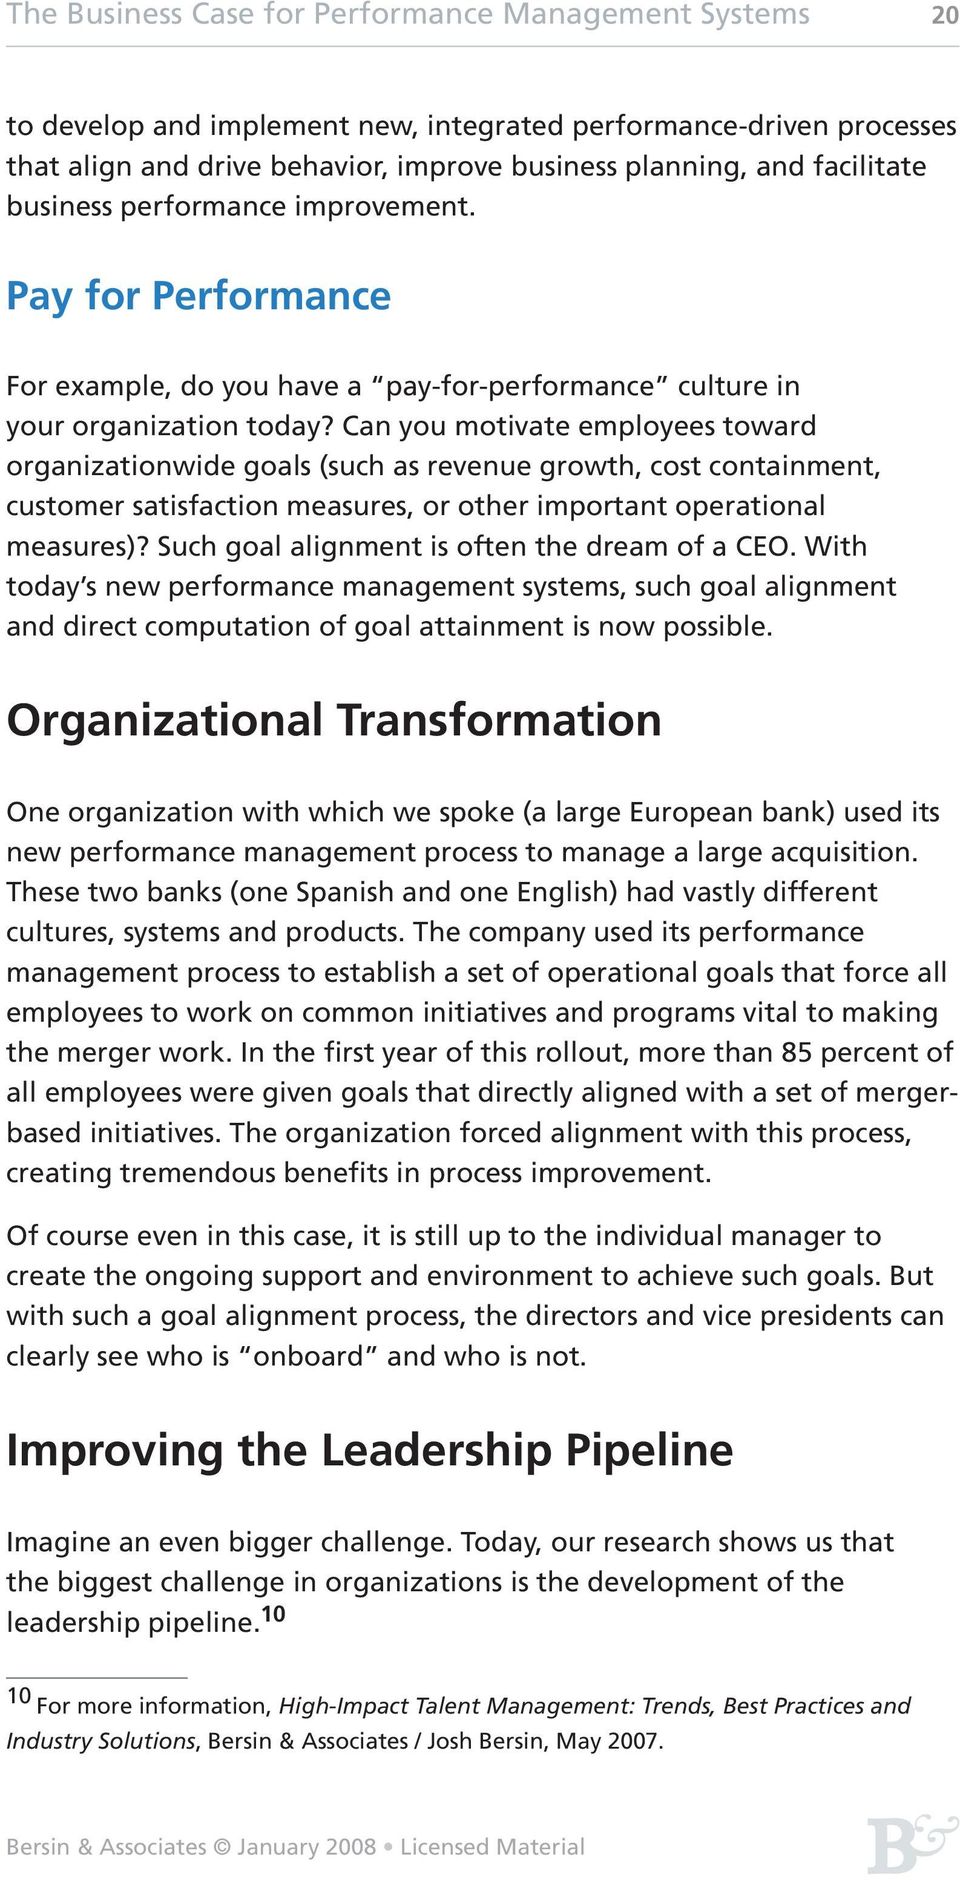 Can you motivate employees toward organizationwide goals (such as revenue growth, cost containment, customer satisfaction measures, or other important operational measures)?